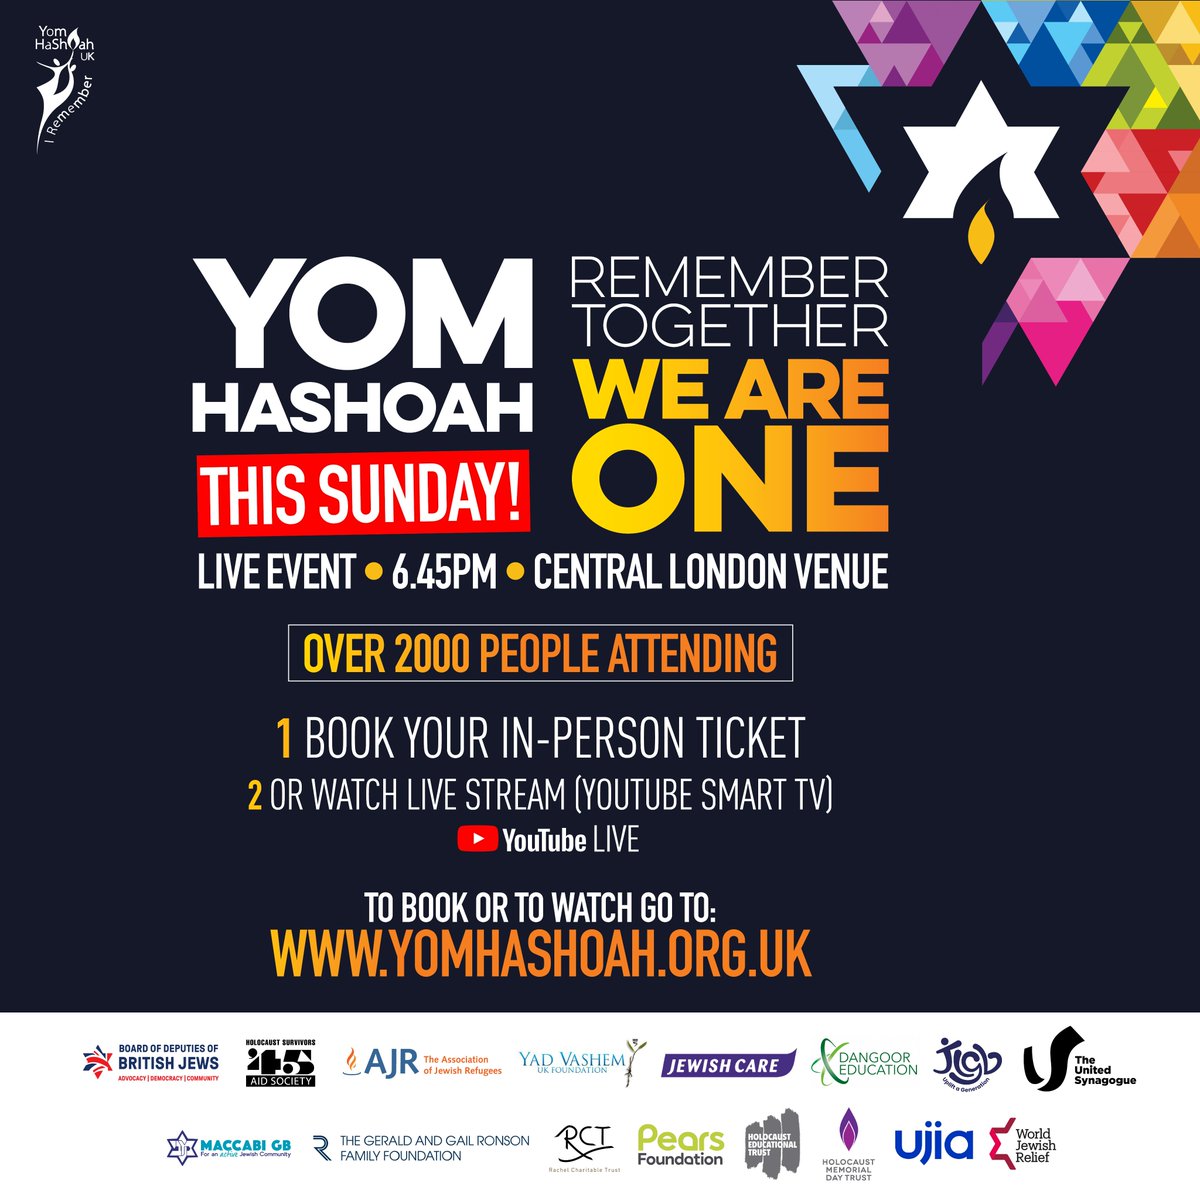 Join Remember Together this Sunday for Yom Hashoah as we stand together for the UK Commemoration Event taking place on Sunday 5 May, 6:45pm Either book your in-person ticket or watch the live stream Yomhashoah.org.uk #UJIA #YomHashoah #RememberTogether #WeAreOne